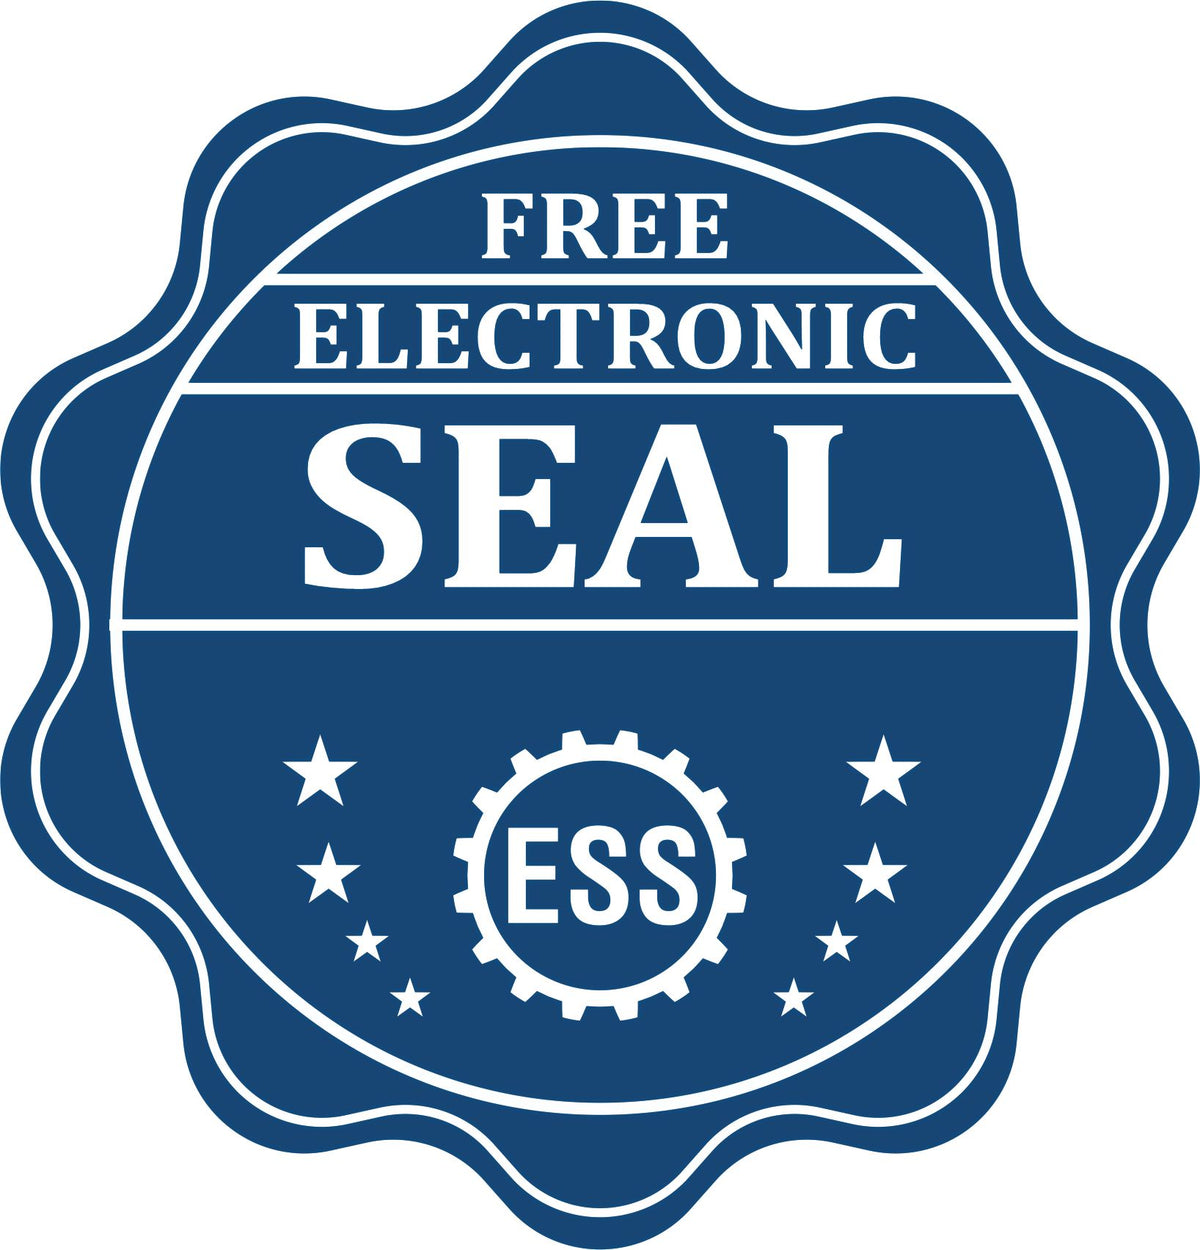 A badge showing a free electronic seal for the Handheld Idaho Land Surveyor Seal with stars and the ESS gear on the emblem.